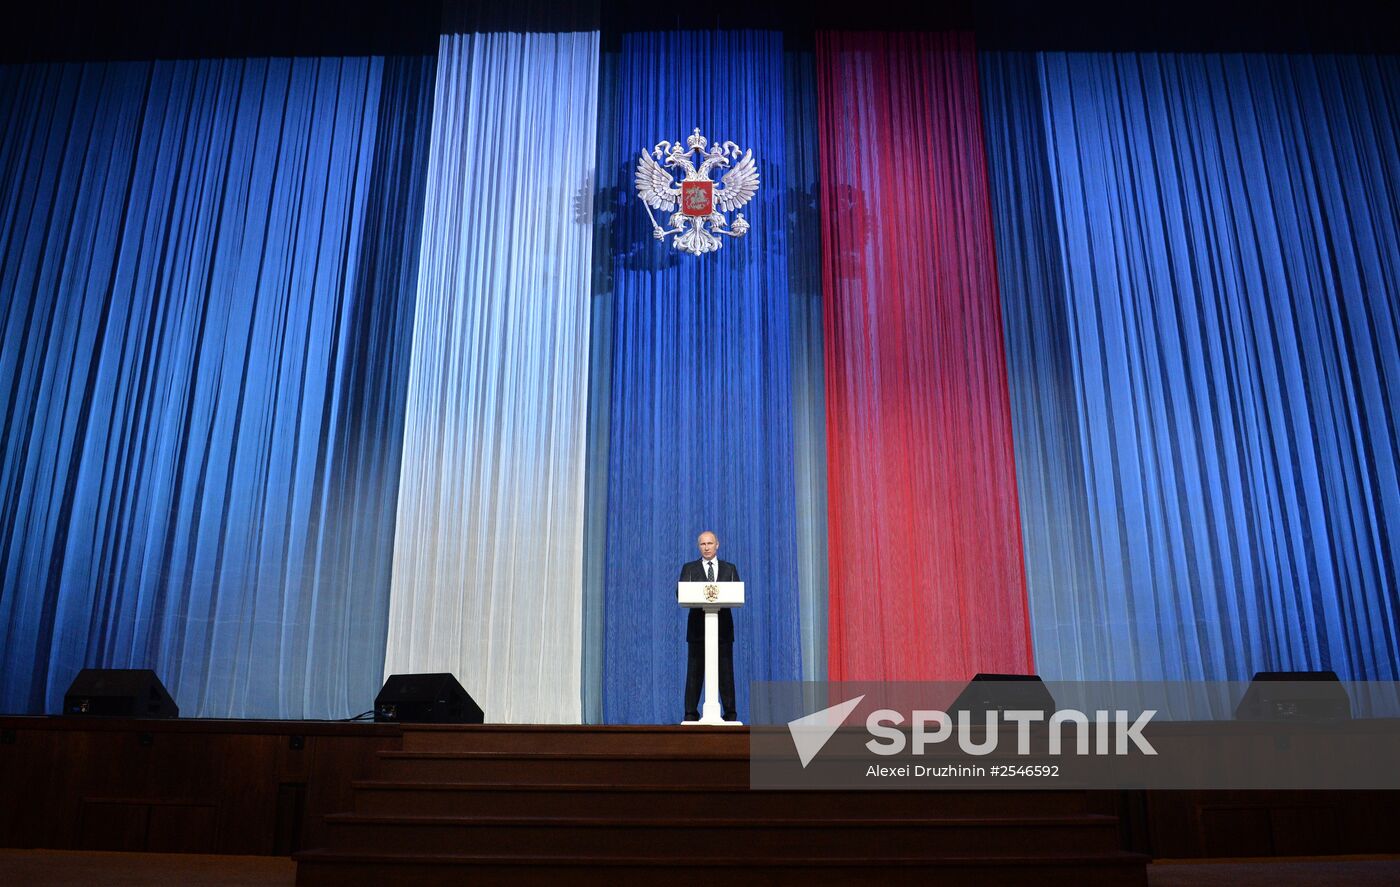 Putin addresses a gathering on State Security Agencies Day